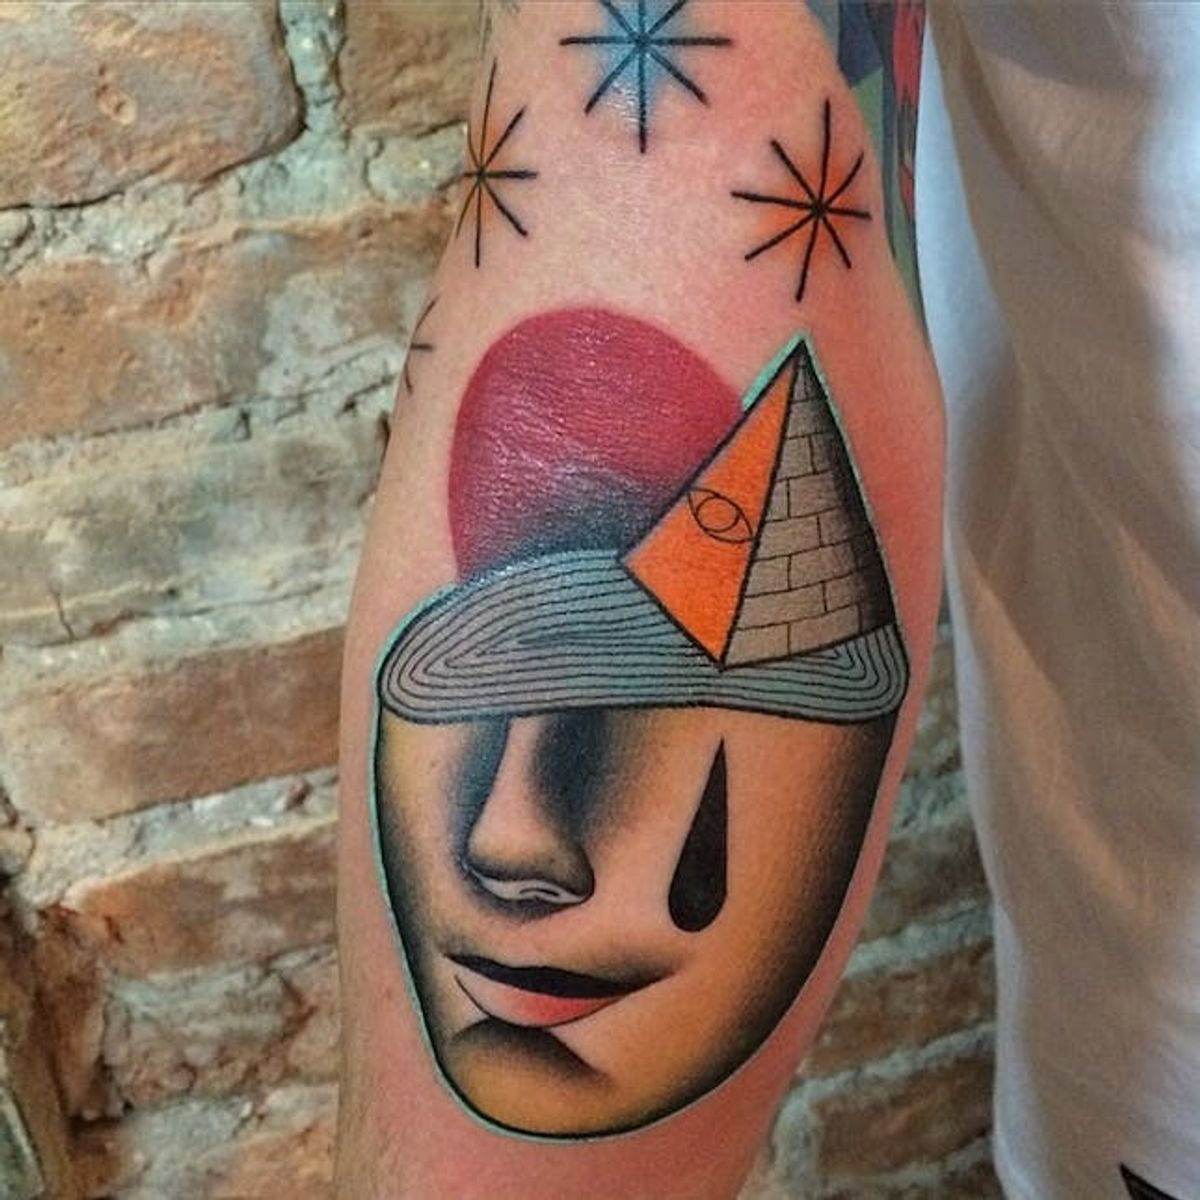 This Tattoo Artist’s Surrealist Designs Belong in the MoMA